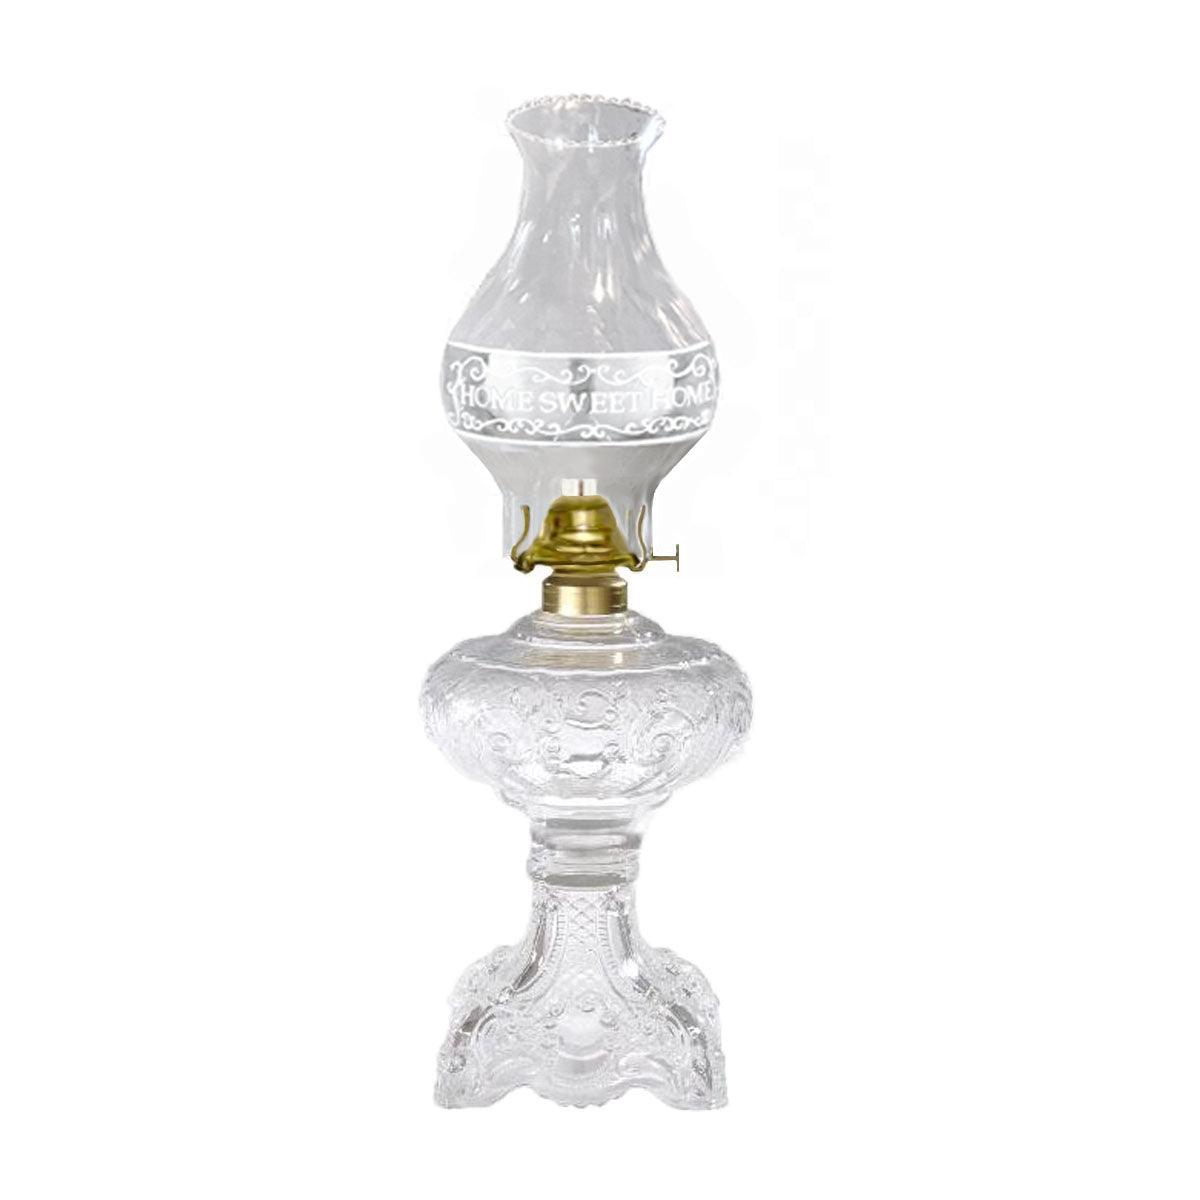 Home Sweet Home Oil Lamp - paxton hardware ltd